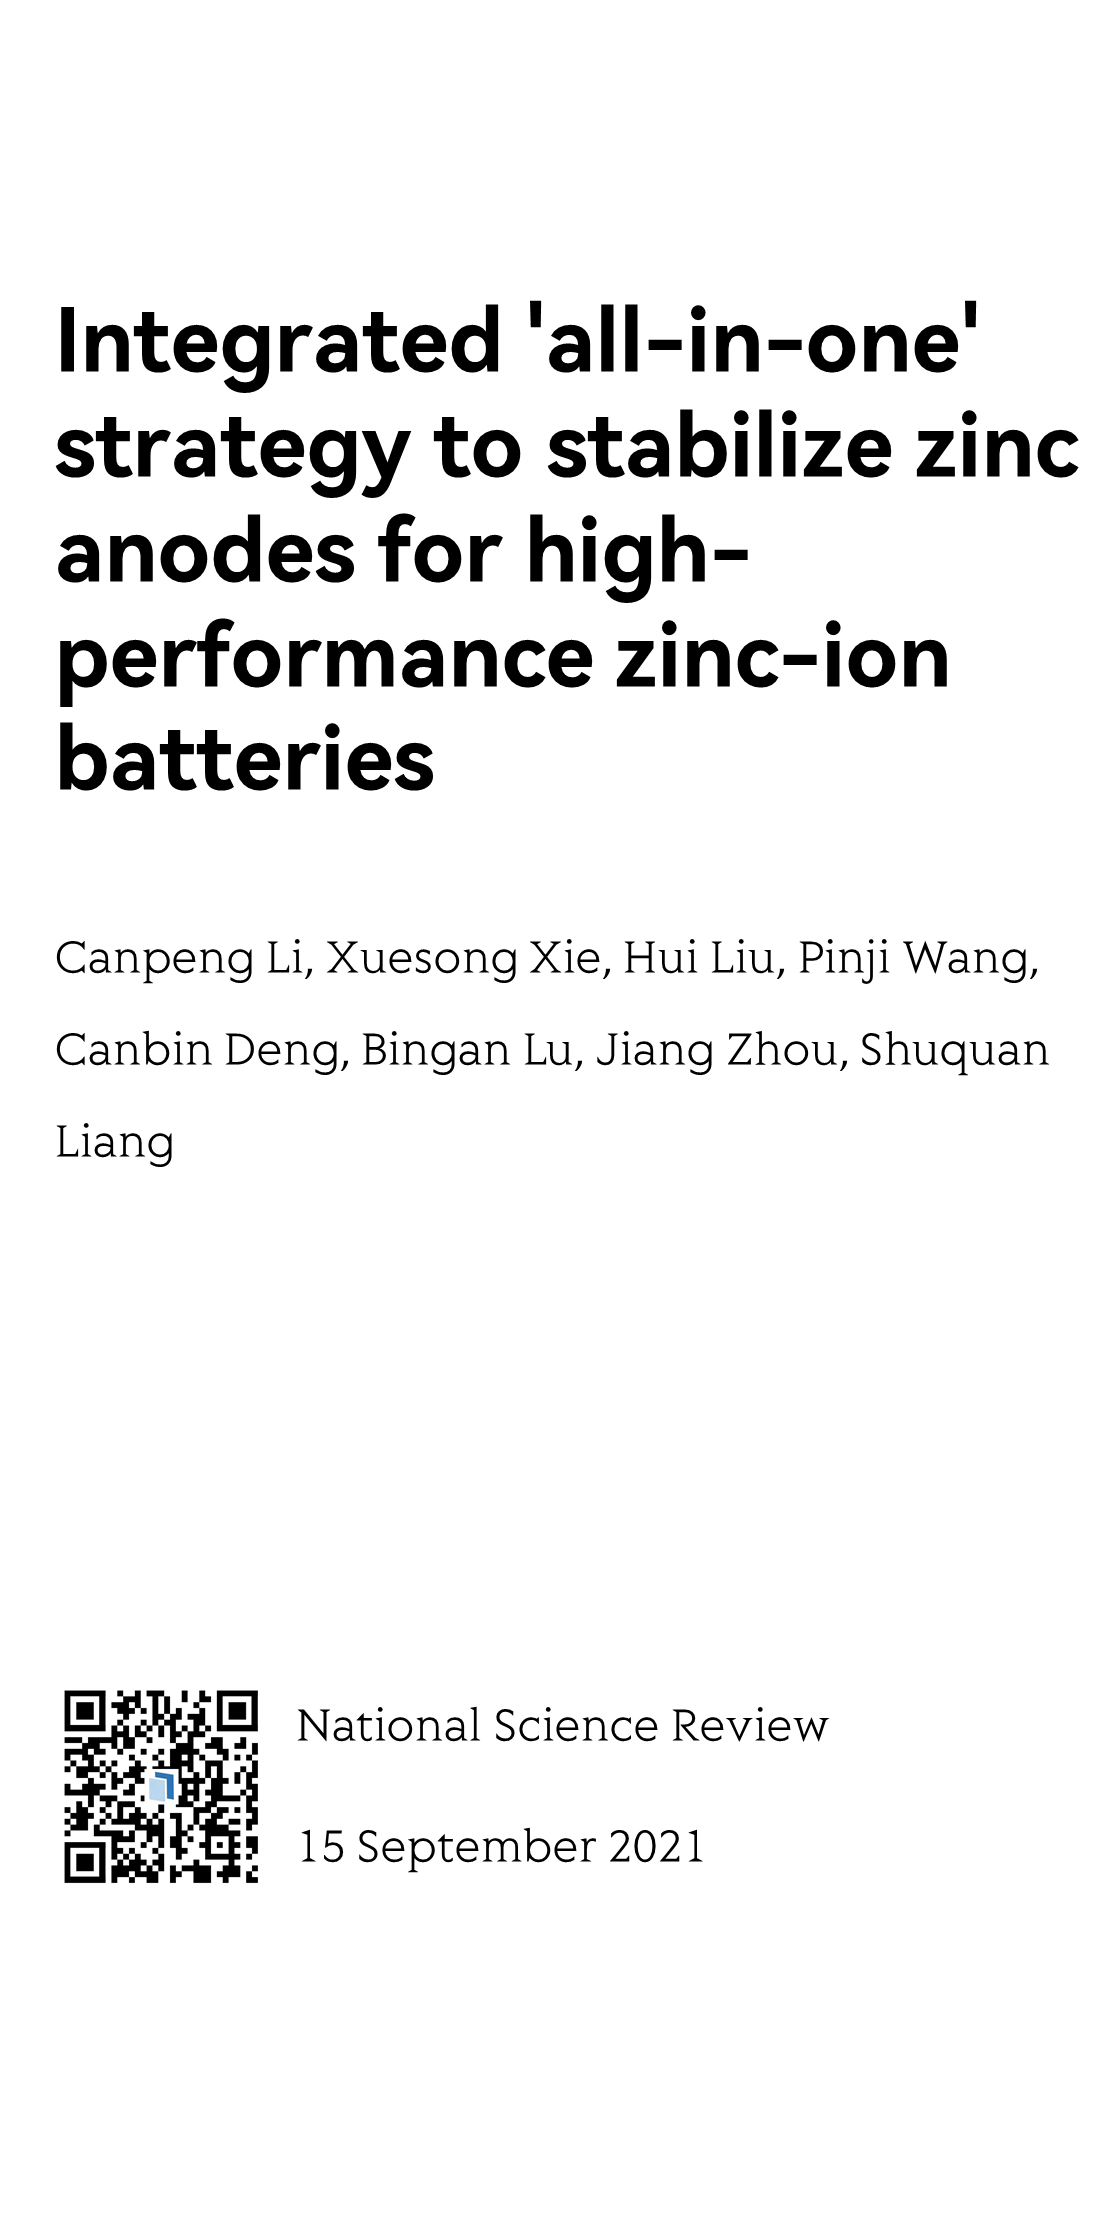 Integrated 'all-in-one' strategy to stabilize zinc anodes for high-performance zinc-ion batteries_1